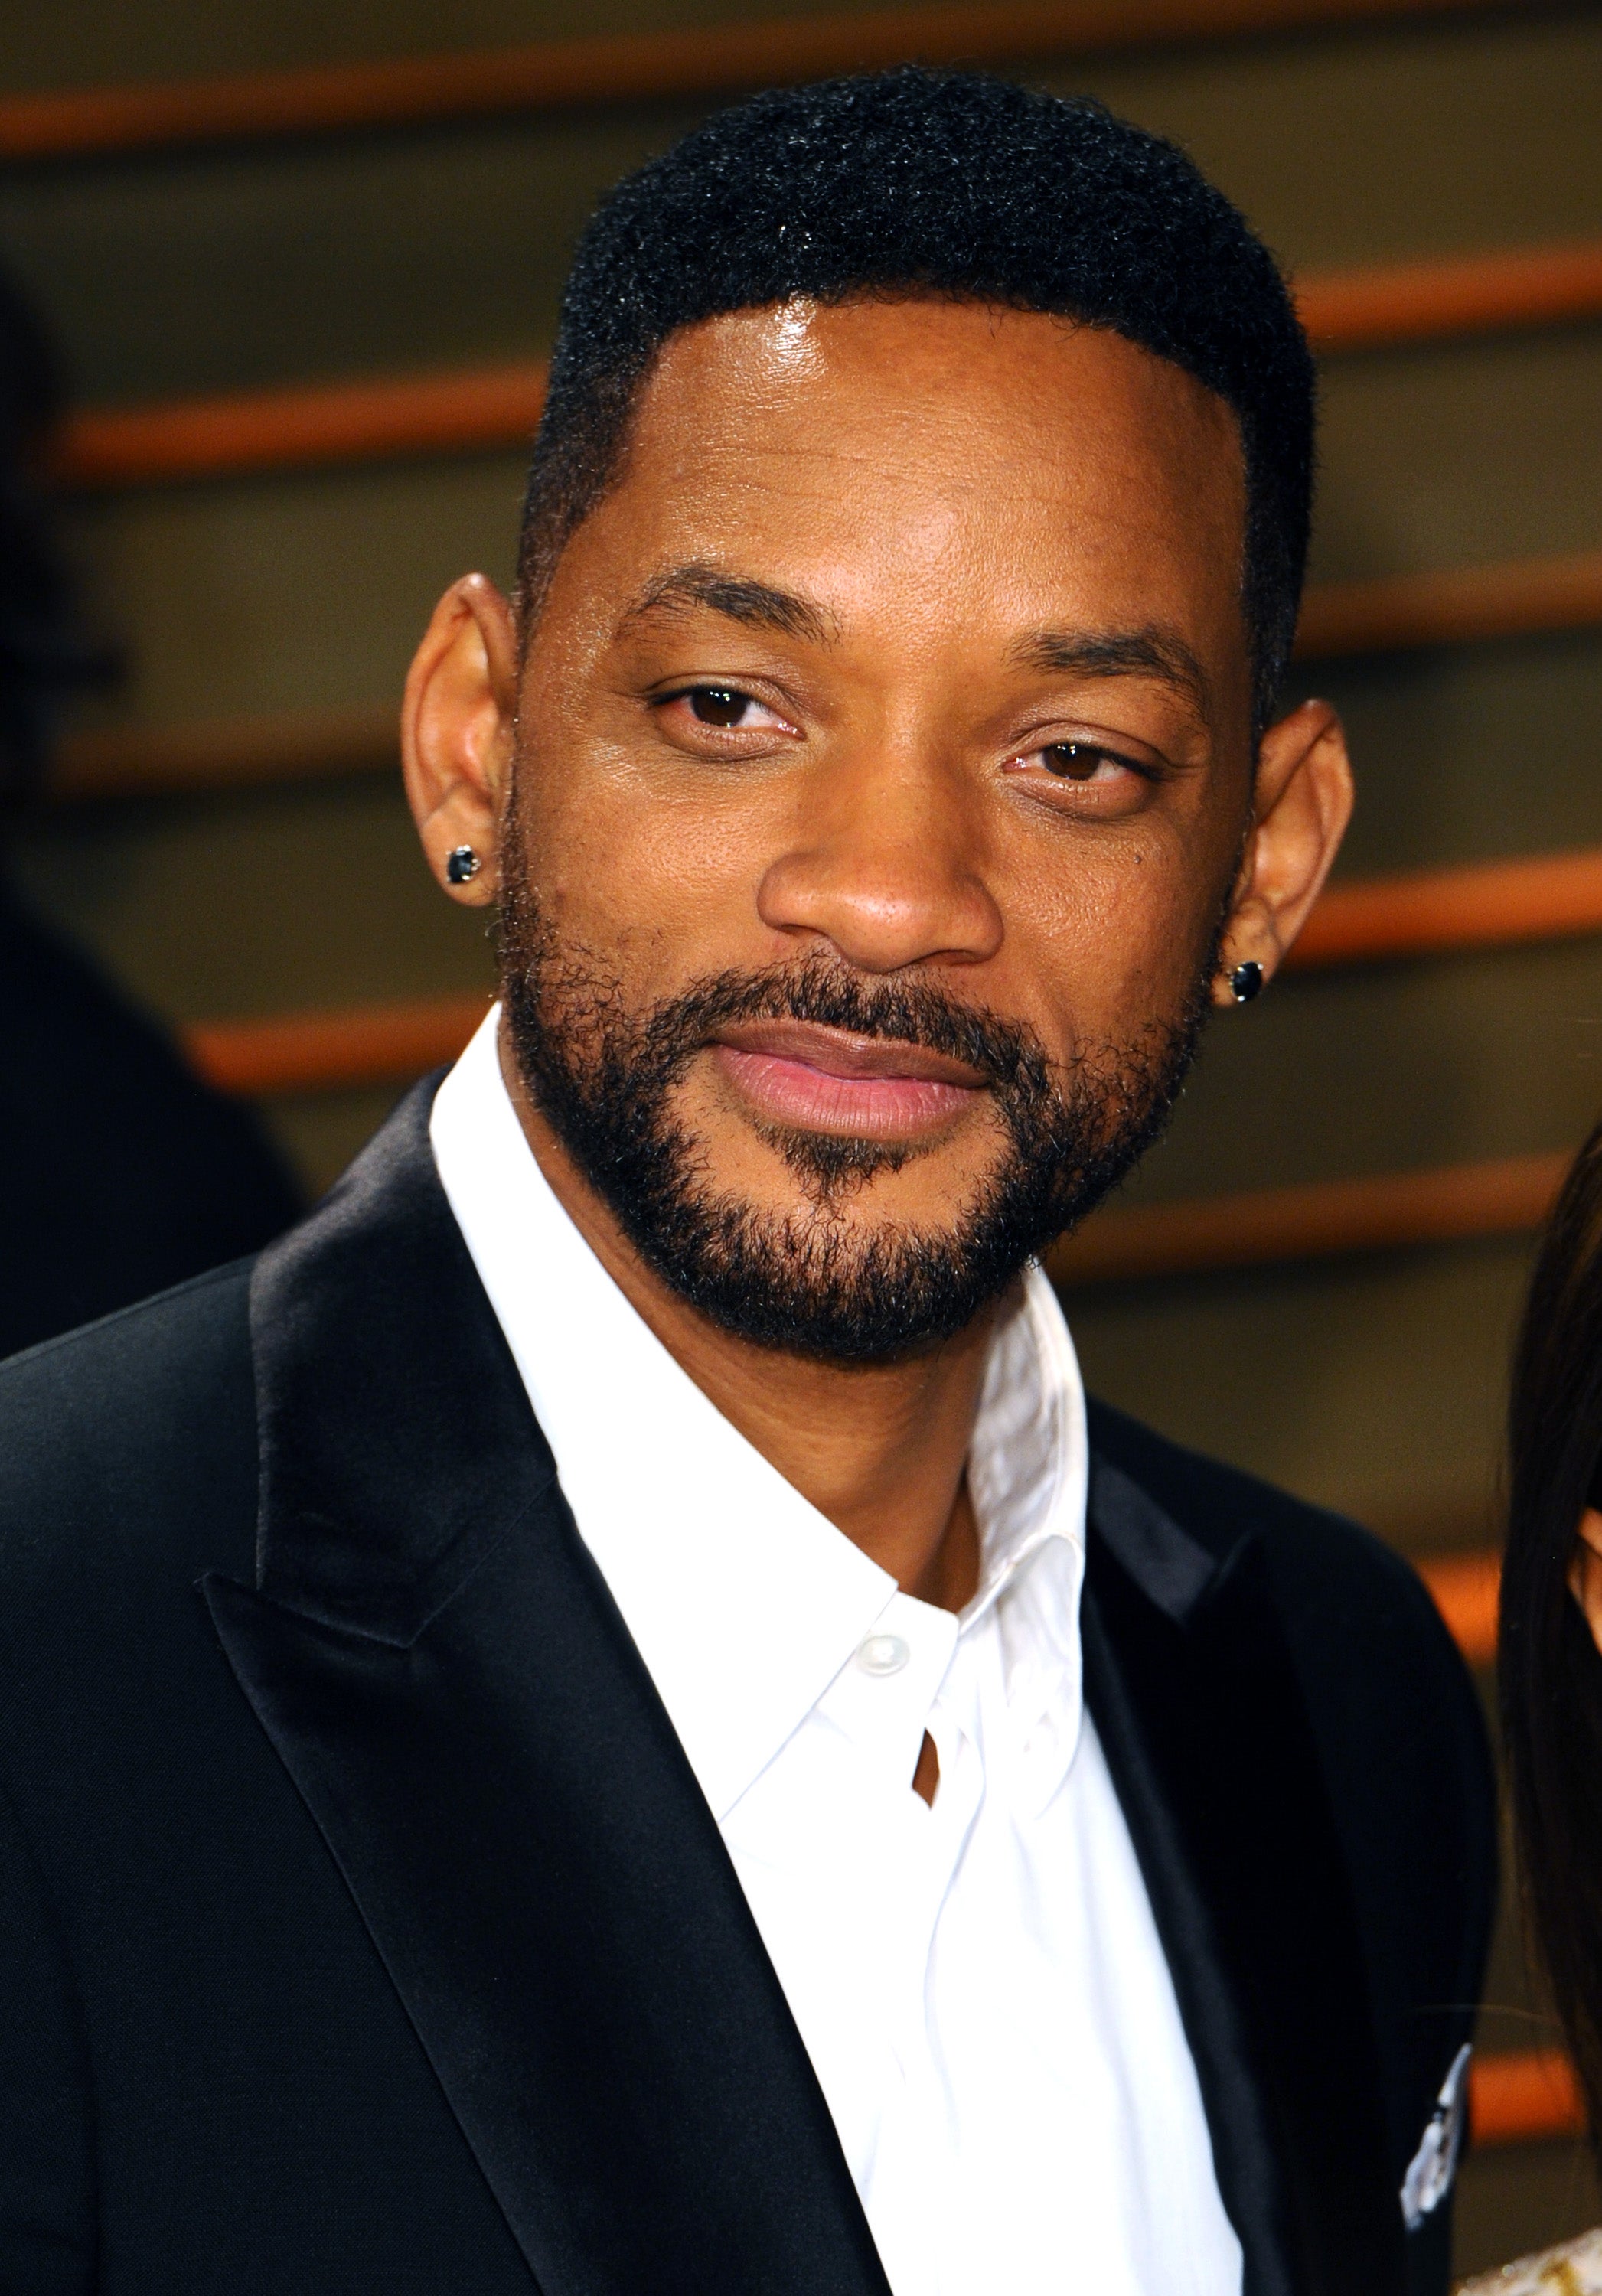 Hear Will Smith's Return to Music After More than a Decade
